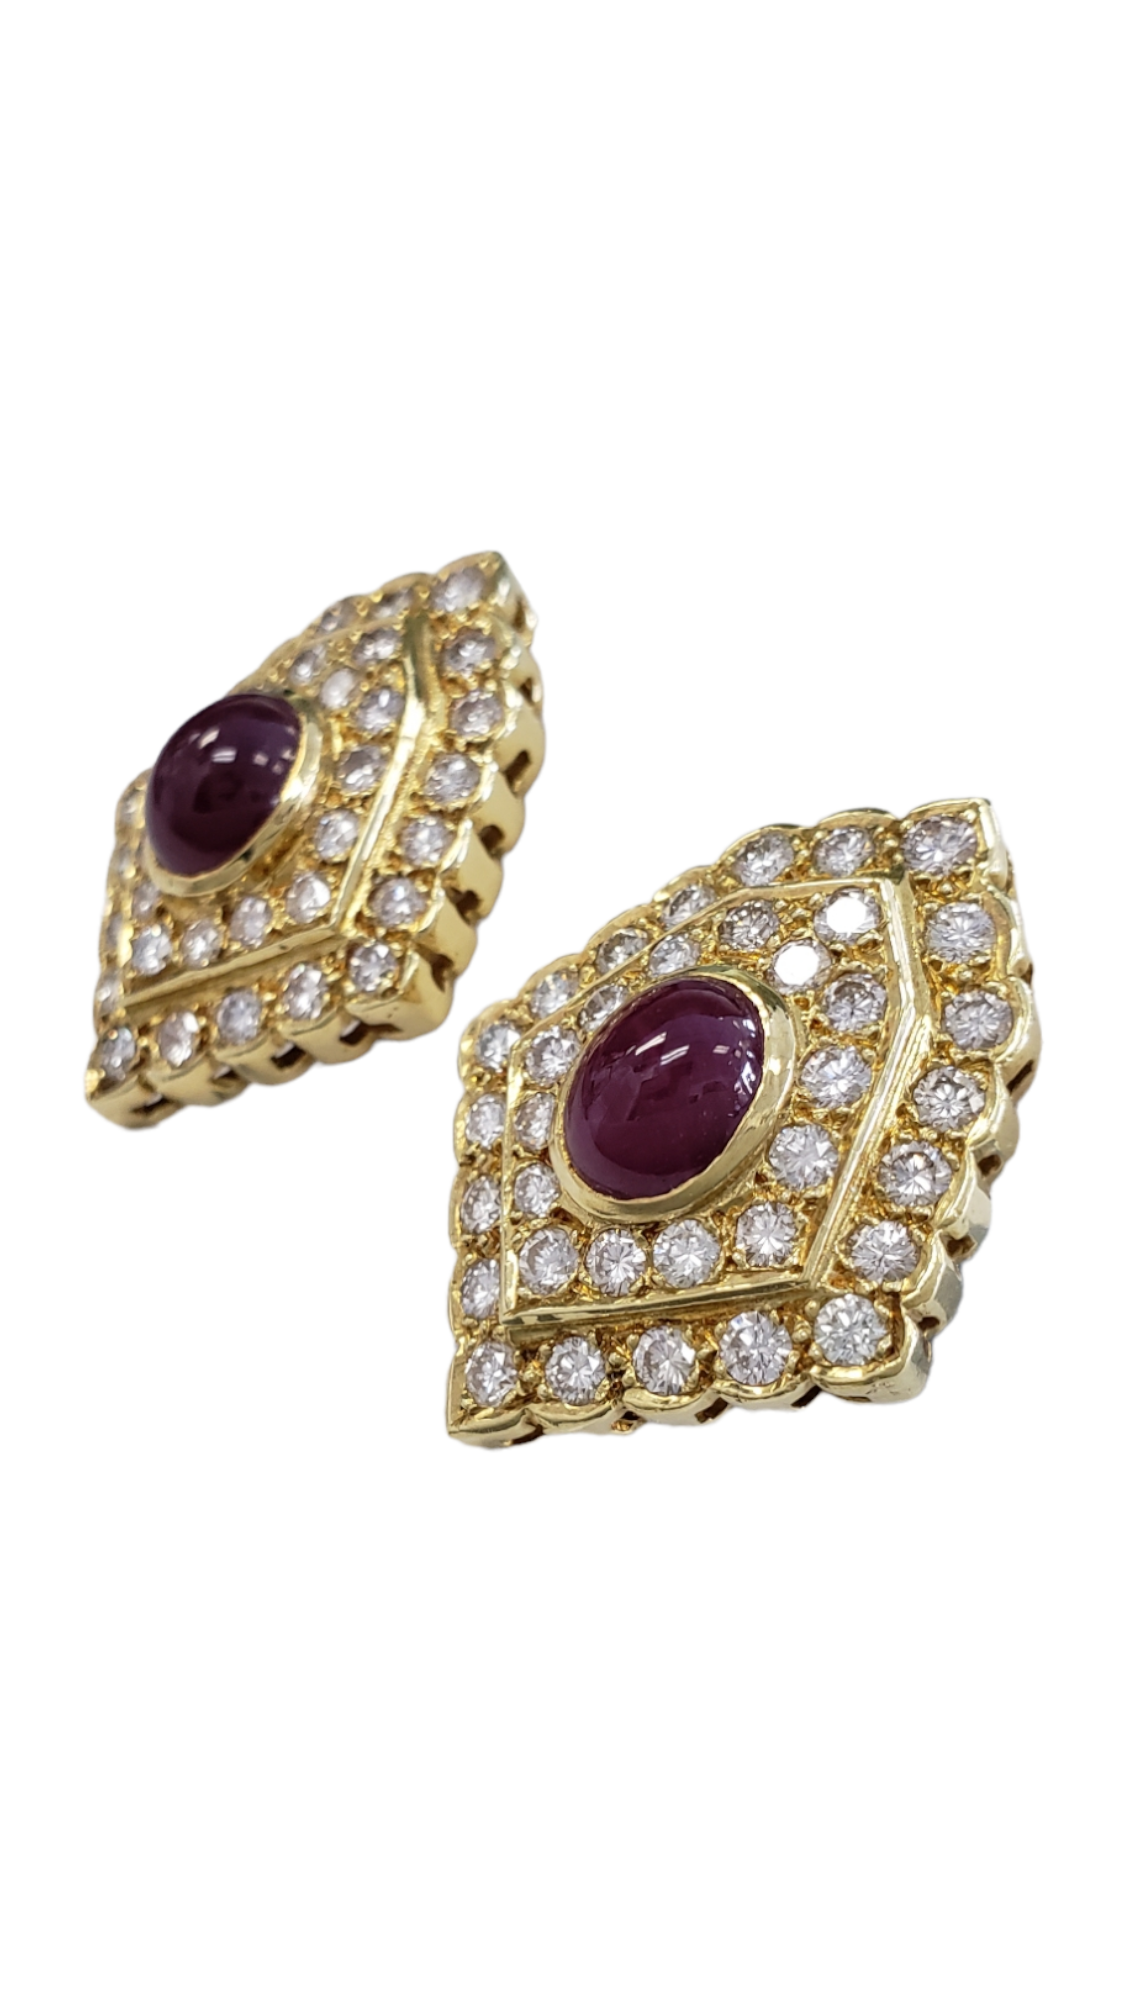 Cabochon Ruby and Diamond Women's Earrings made in 18-karat Yellow Gold w/ Omega Clips